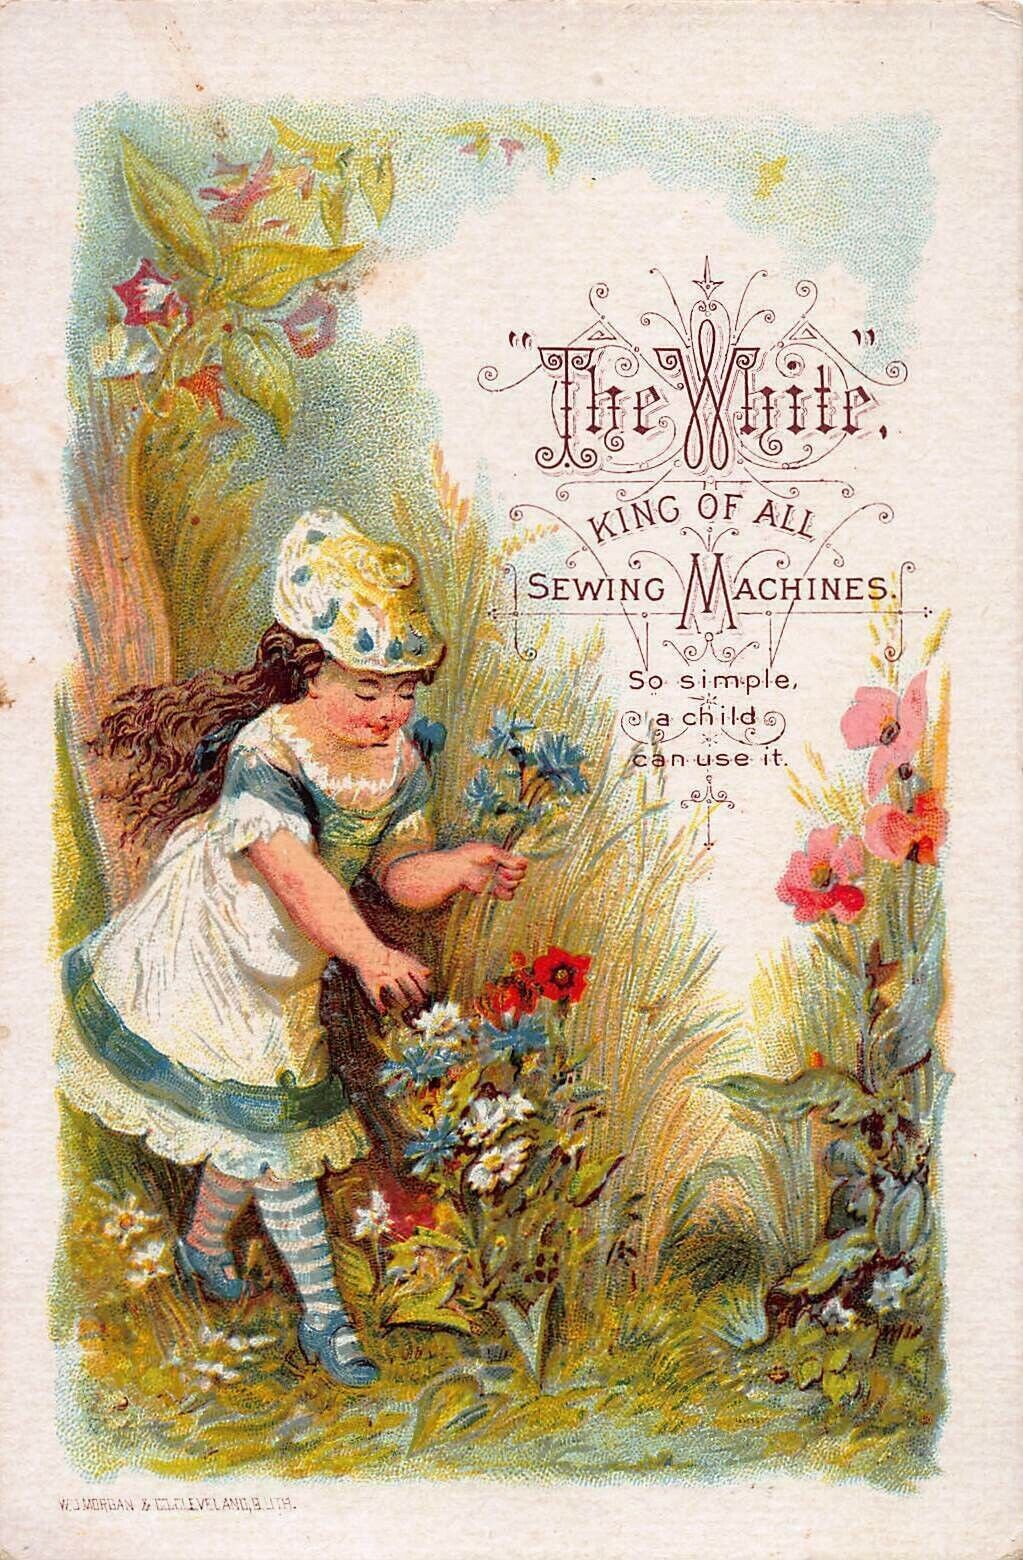 The White, King of All Sewing Machines, 19th Century Trade Card